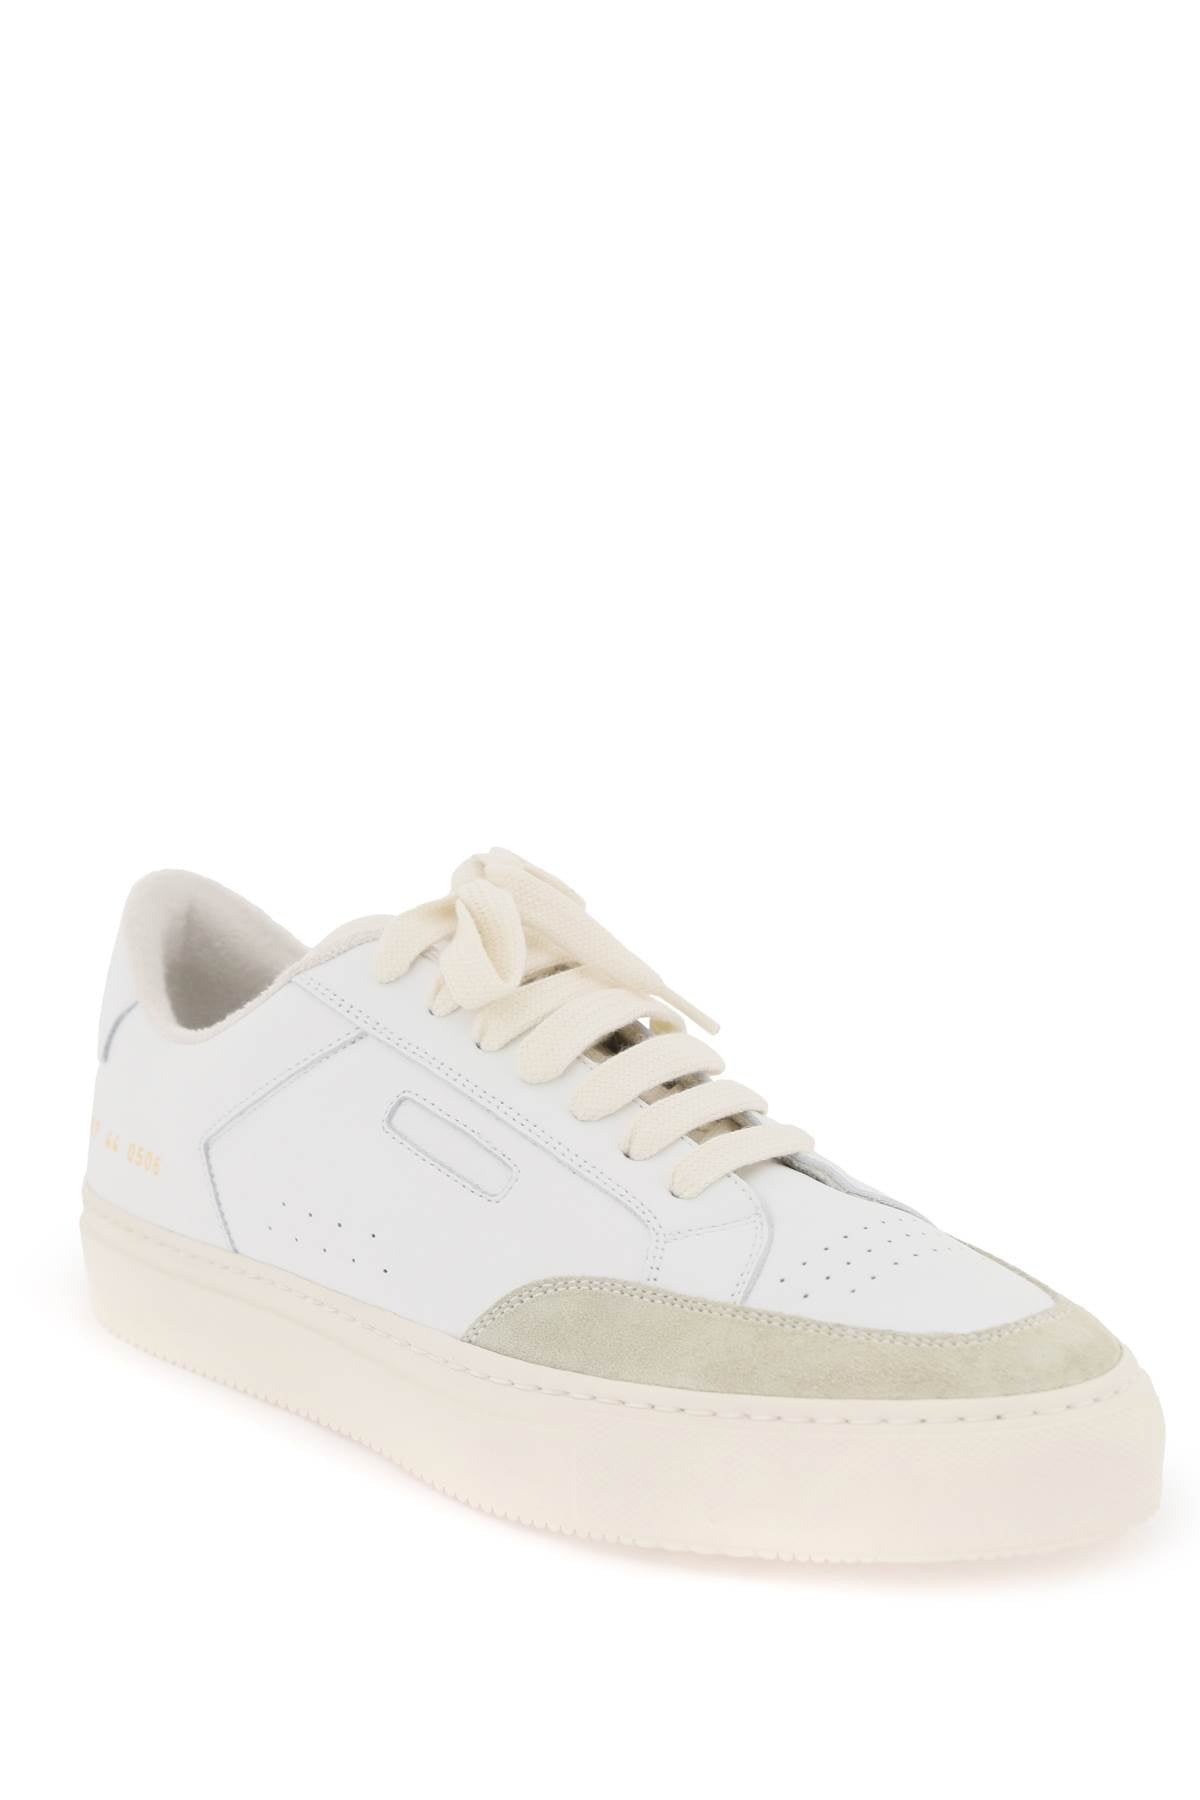 Shop Common Projects Sneakers Tennis Pro